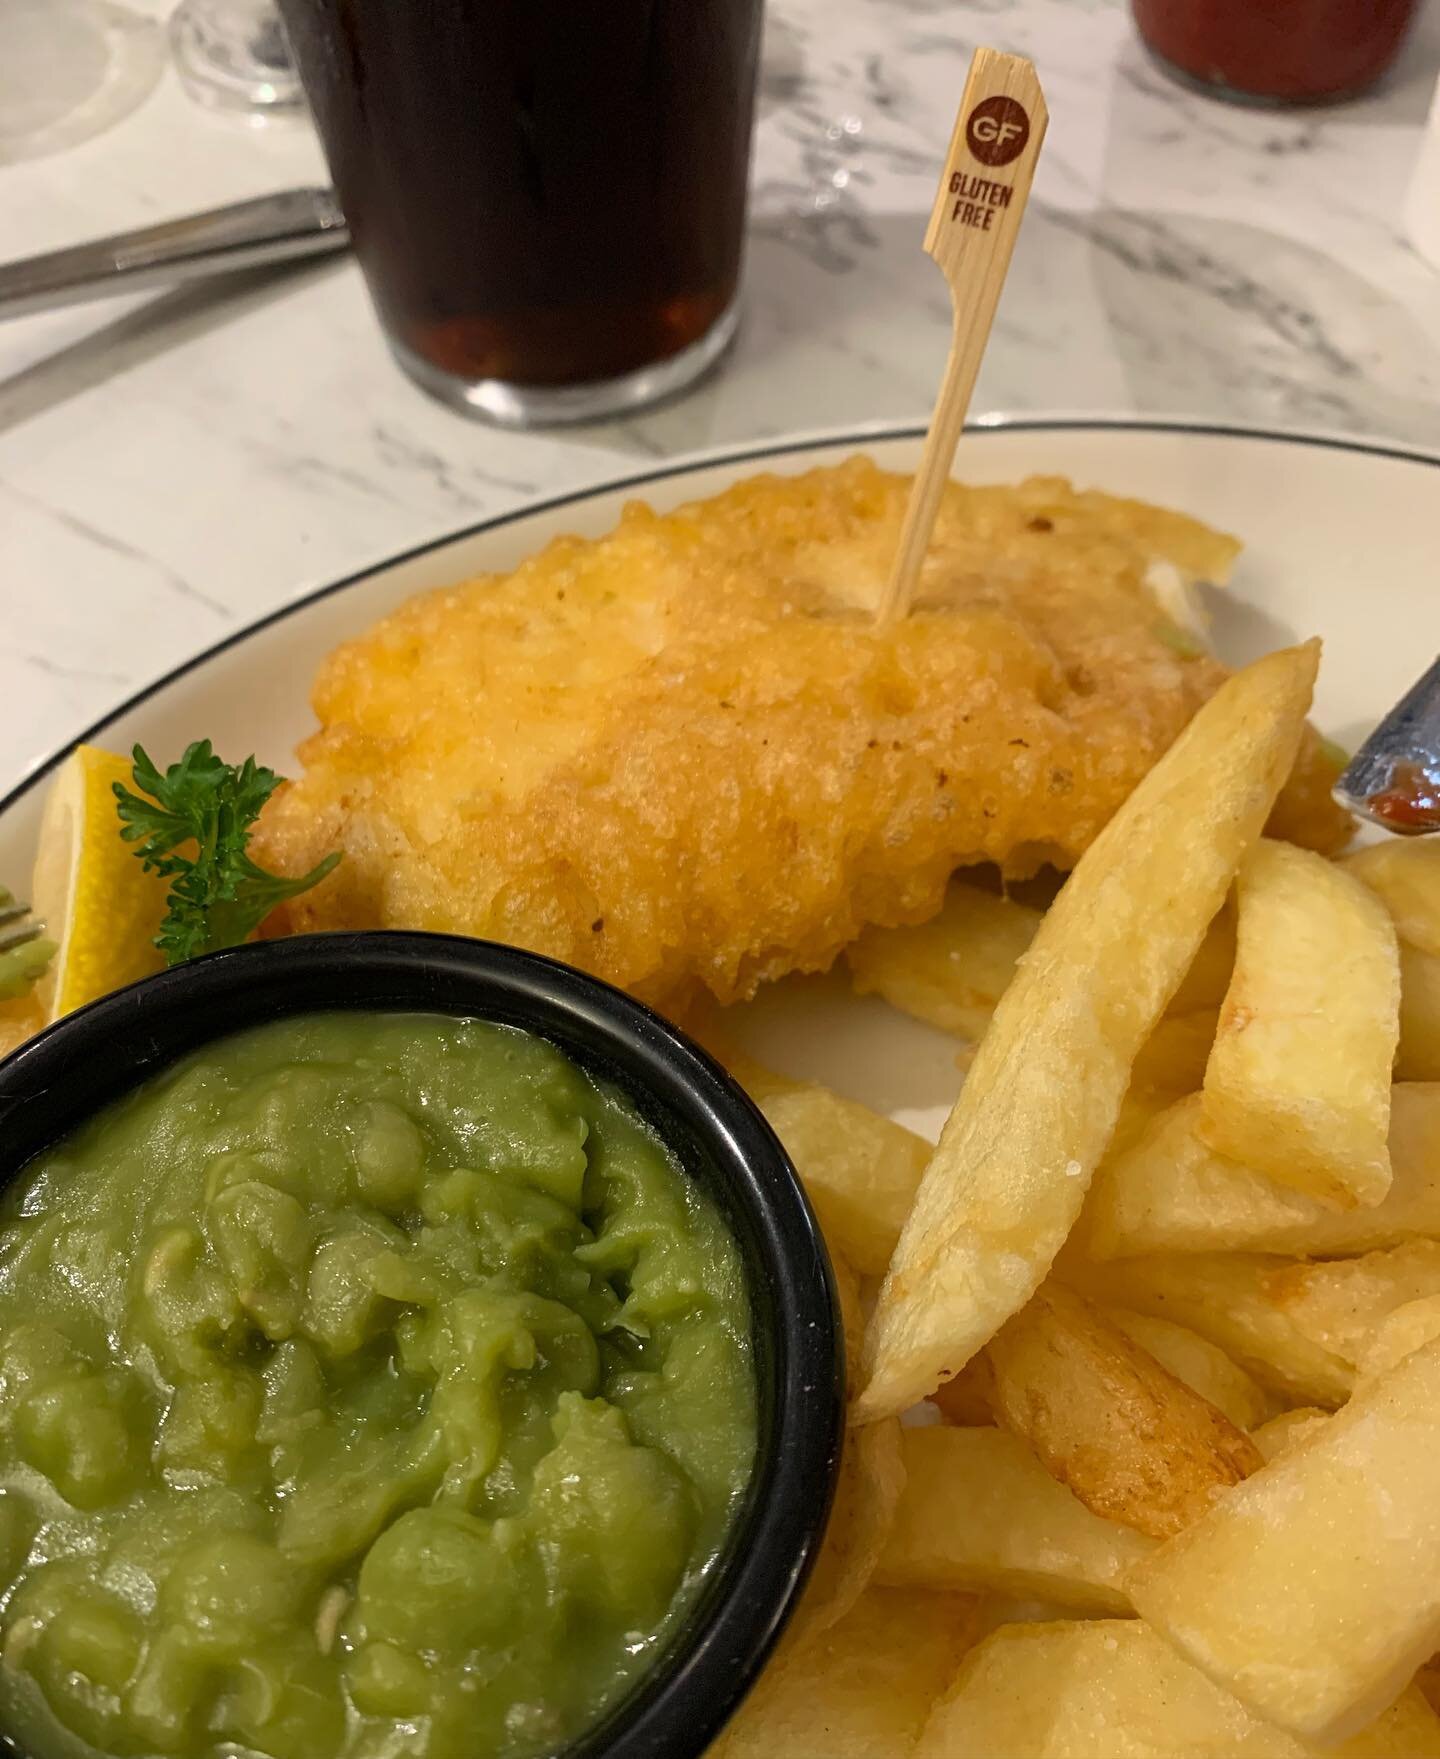 Oooooh one of the best Gluten-free fish &amp; chips we&rsquo;ve had. Perfectly crisp and tasty batter. 
#glutenfree #glutenfreeholidays #glutenfreekids #fishandchips #whitby #familymealsout #familyholidays #eatingout #coeliac #celiac #celiactravel #c